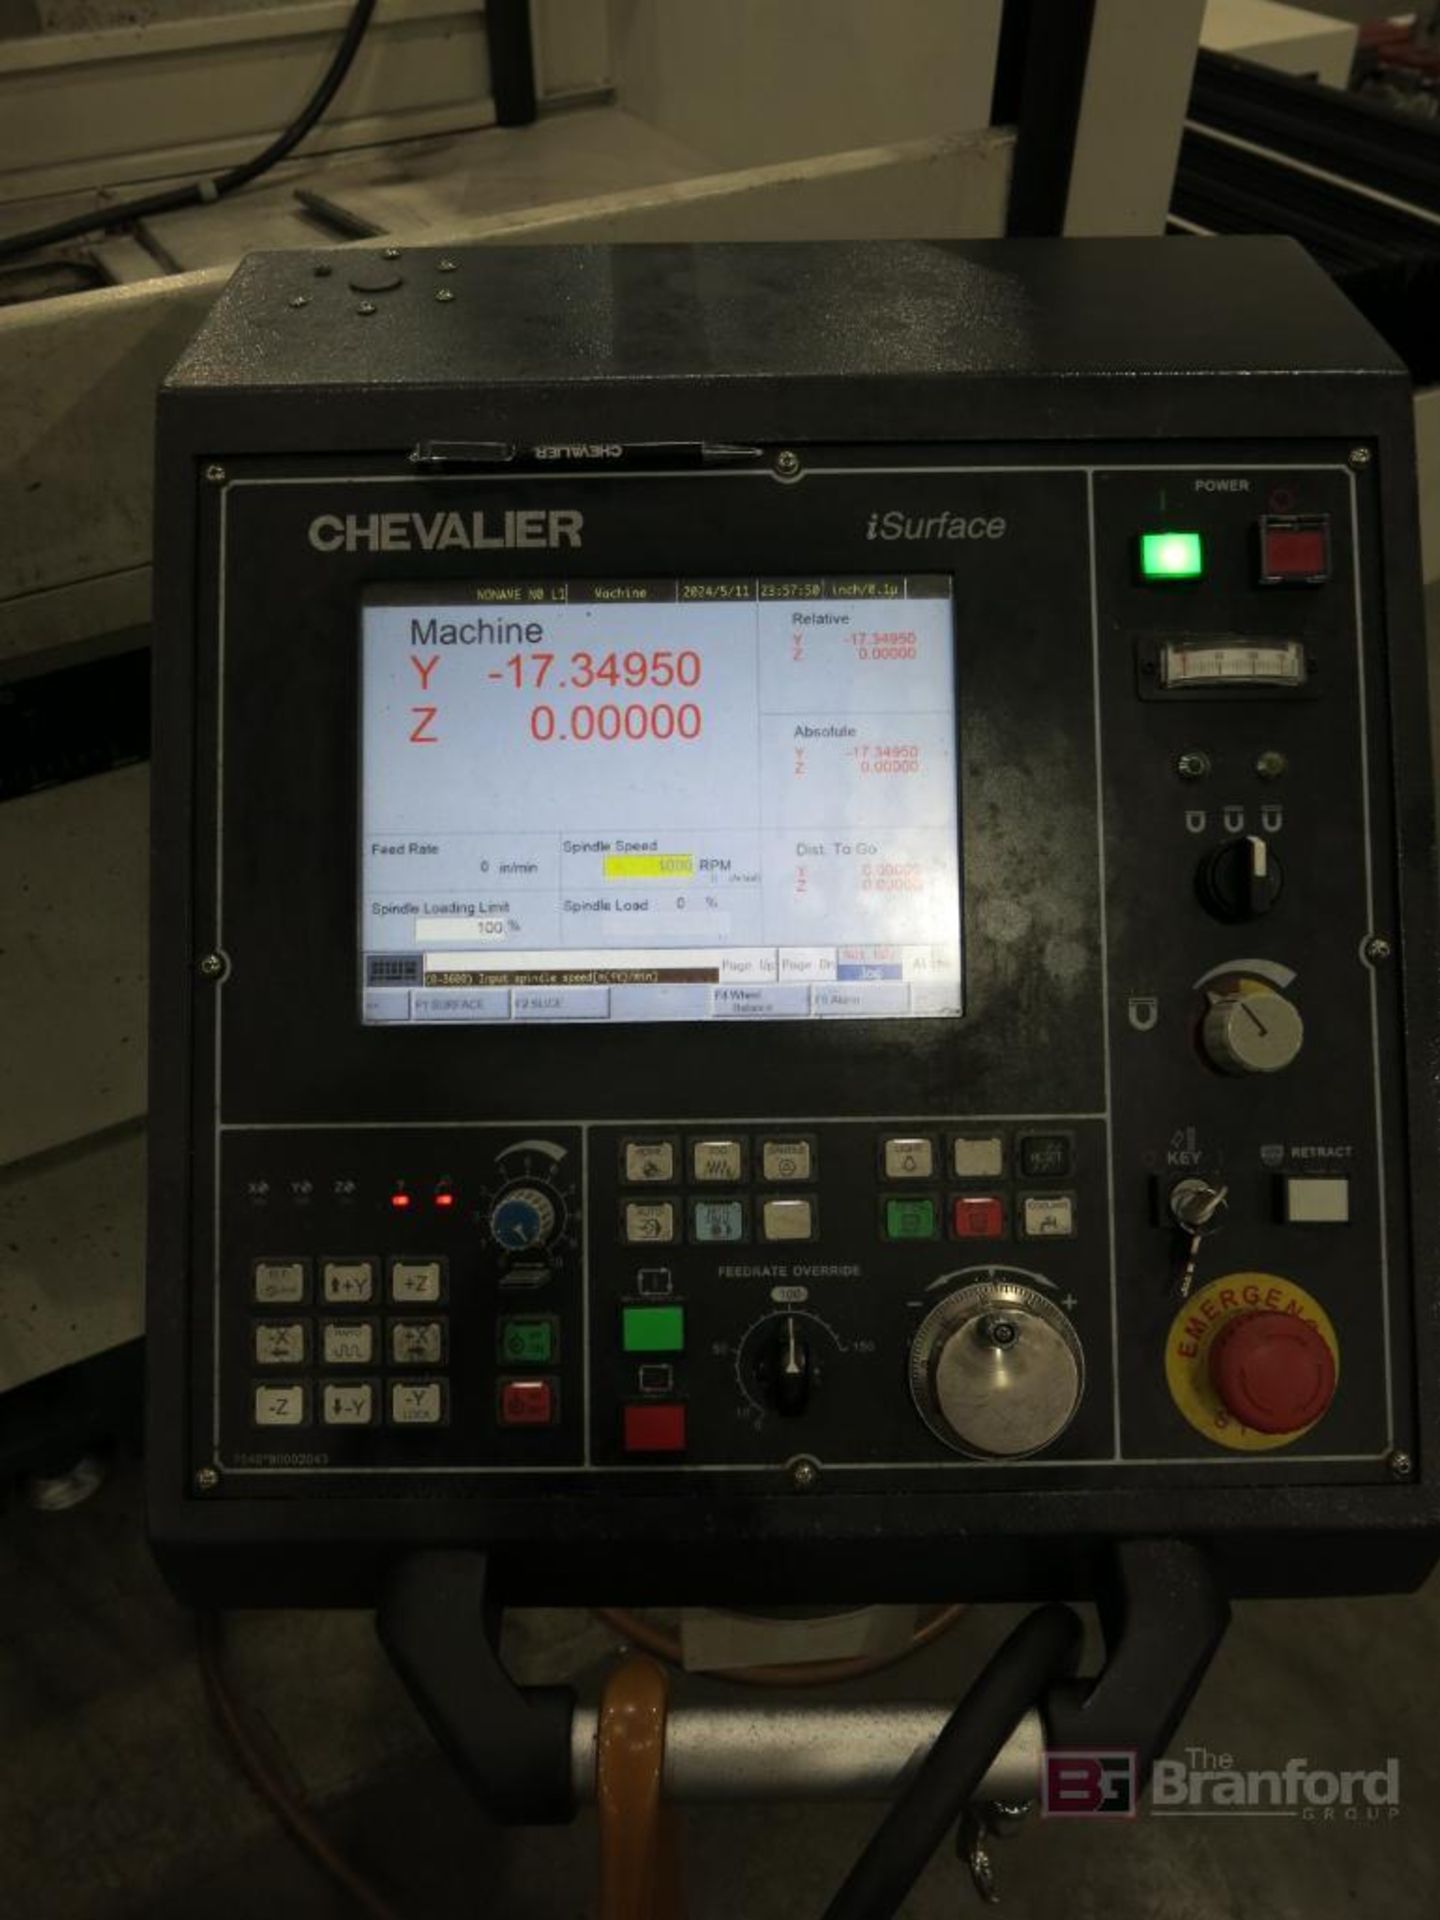 Chevalier Model FSG-2040ADIV Surface Grinder w/ 20" x 40" Magnetic Chuck - Image 9 of 10